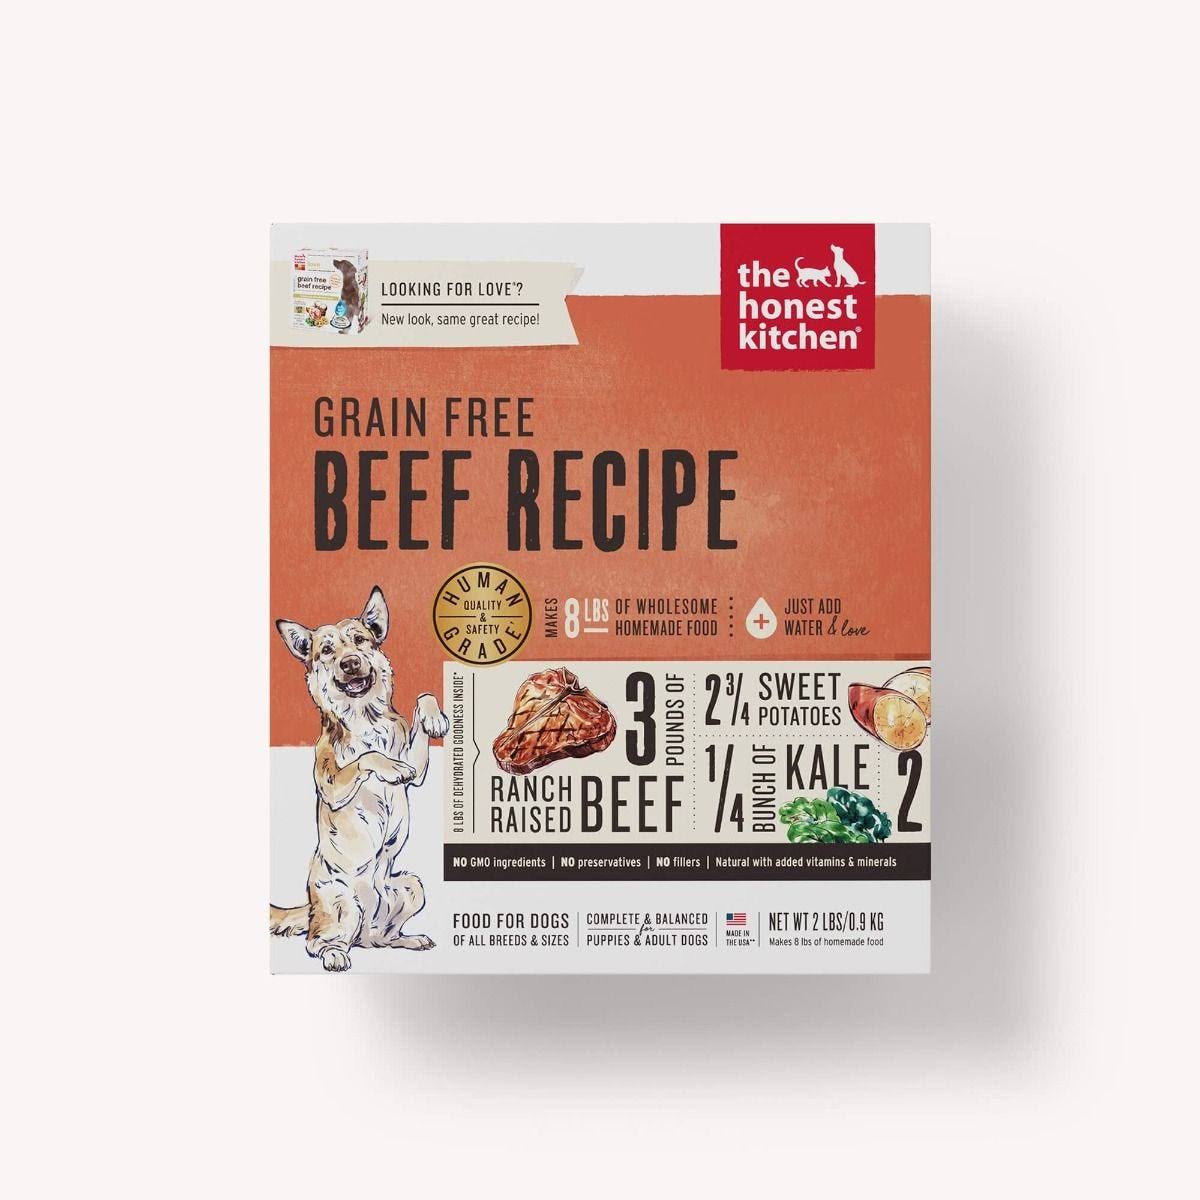 The Honest Kitchen - Dog Food - Grain-free Beef Recipe - Case Of 6 - 2 Lb.